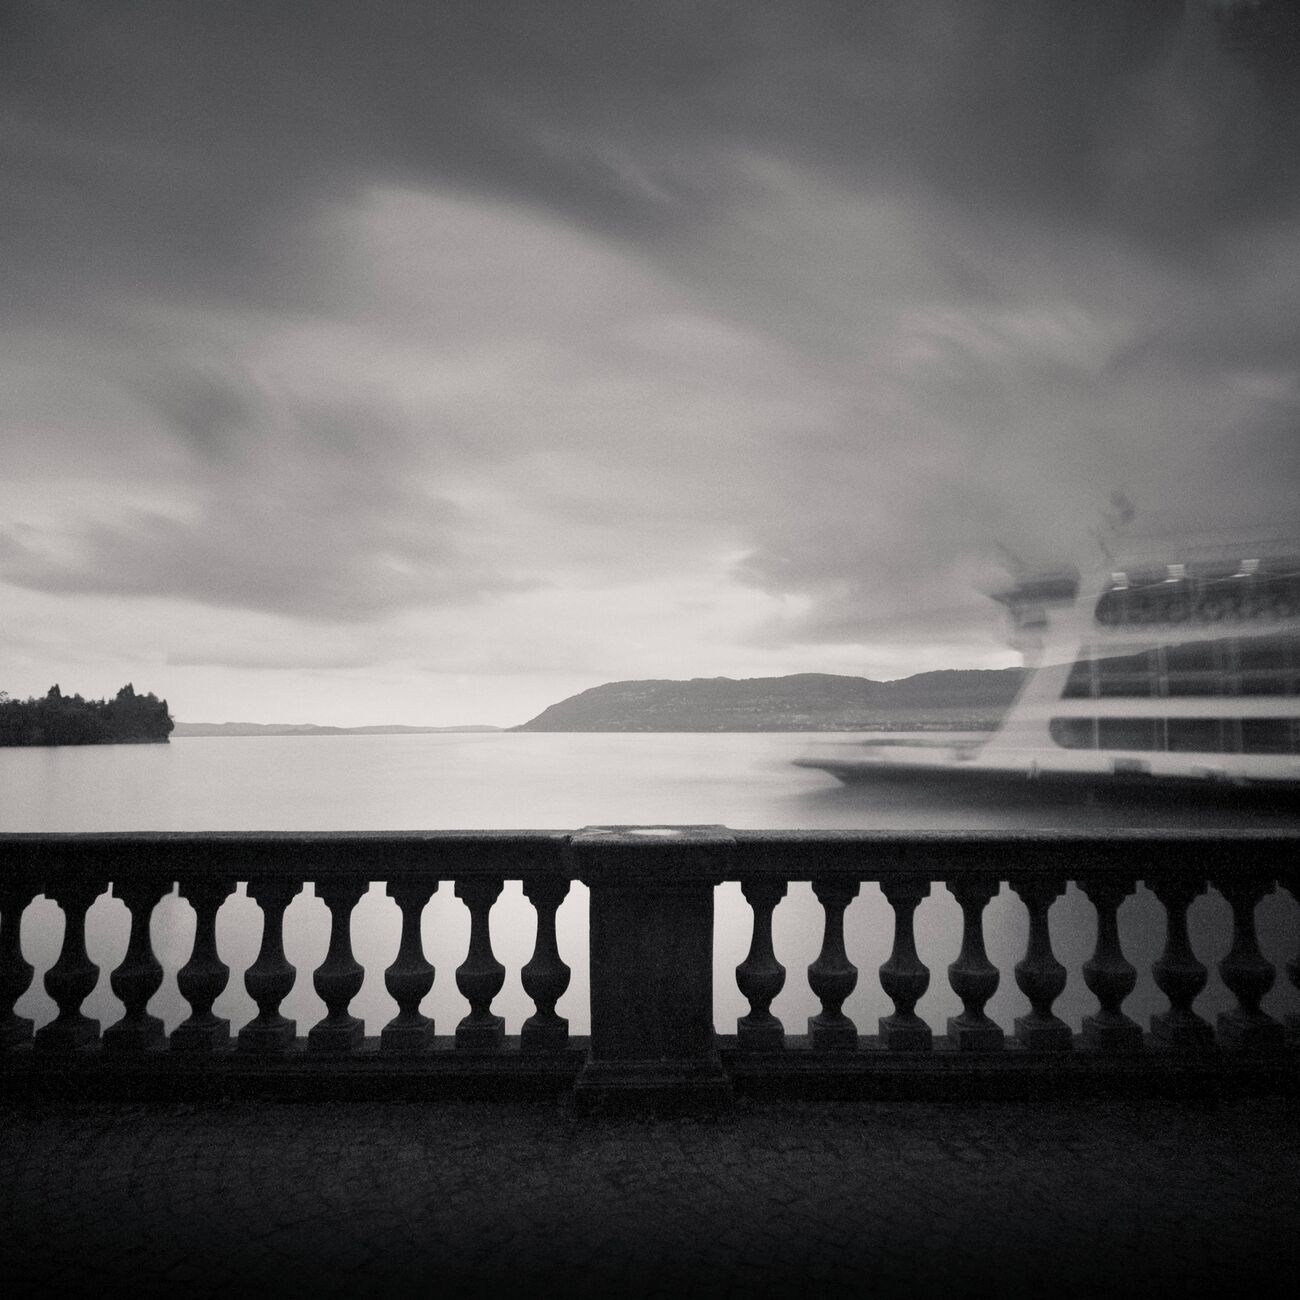 Ferry Cruising, Study 2, Maggiore Lake, Italy. August 2014. Ref-1430 - Denis Olivier Photography